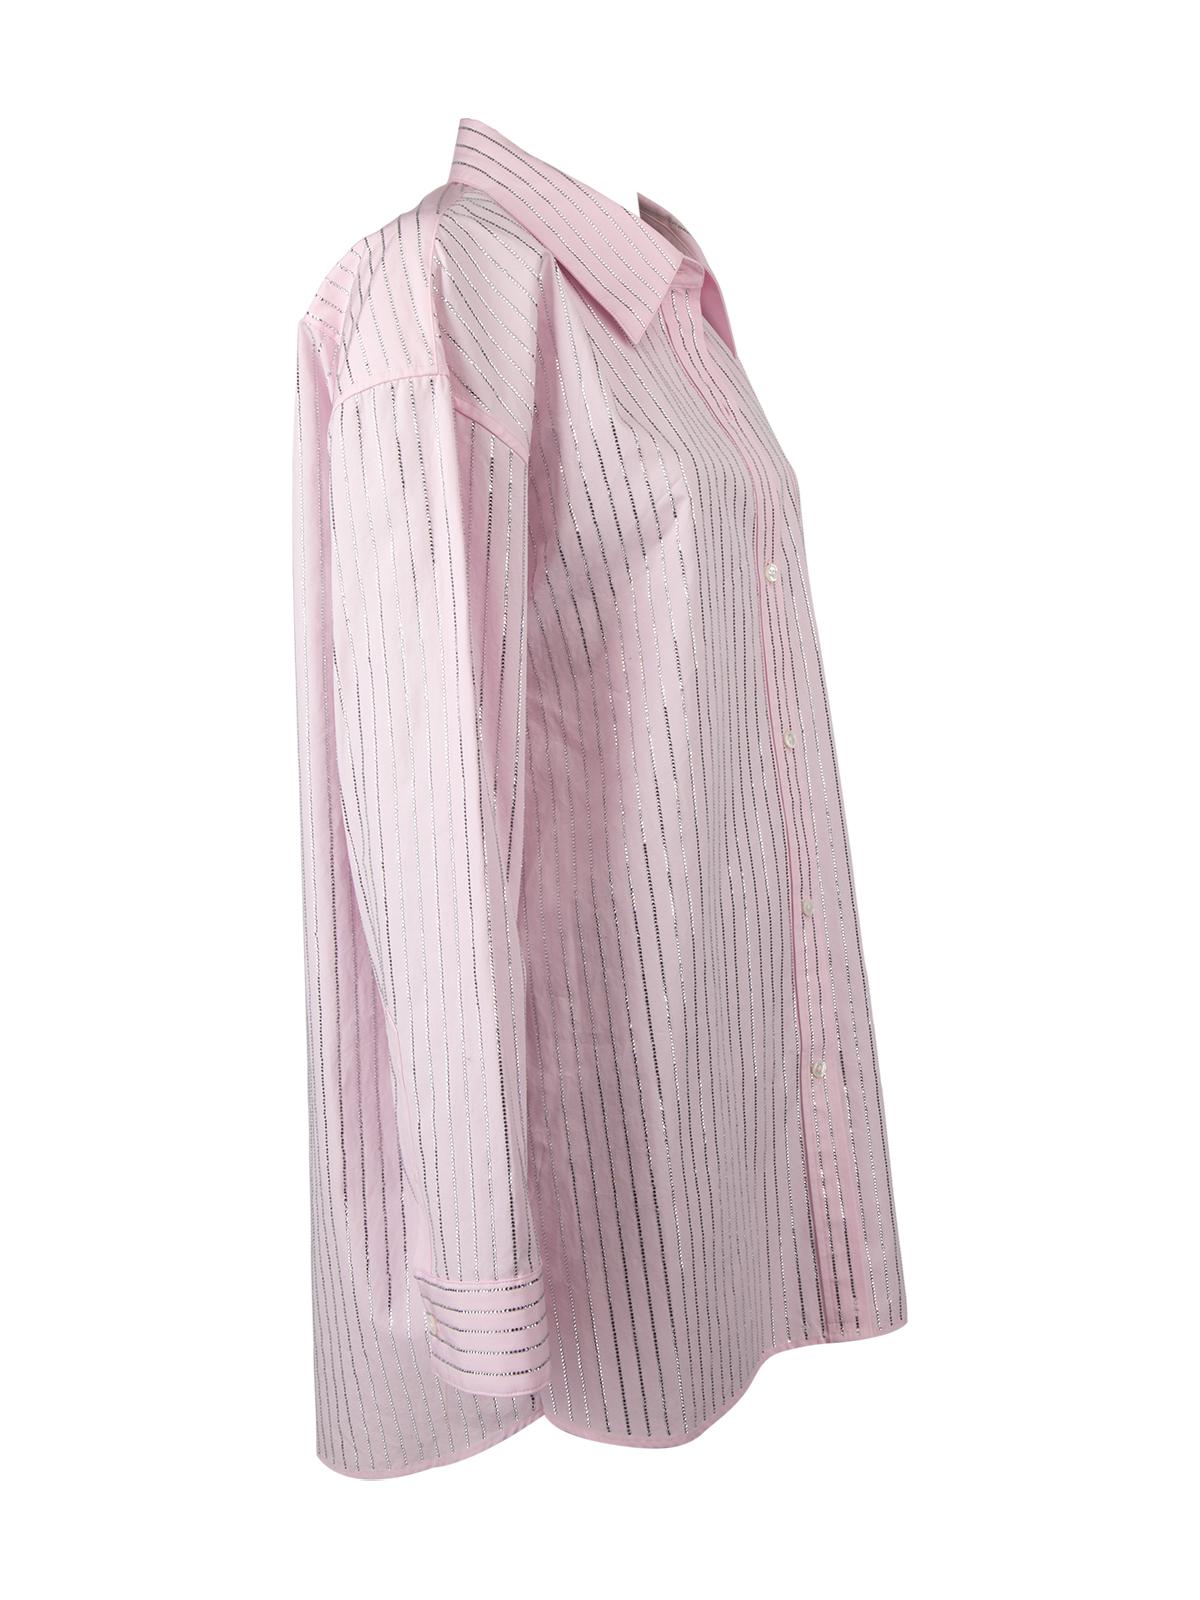 CONDITION is Very good. No visible wear to shirt is evident on this used Alexander Wang designer resale item. Details Pink Diamanté vertical stripes Long-sleeve shirt Loose fit Collared Made in Italy Composition Missing product label, feels like